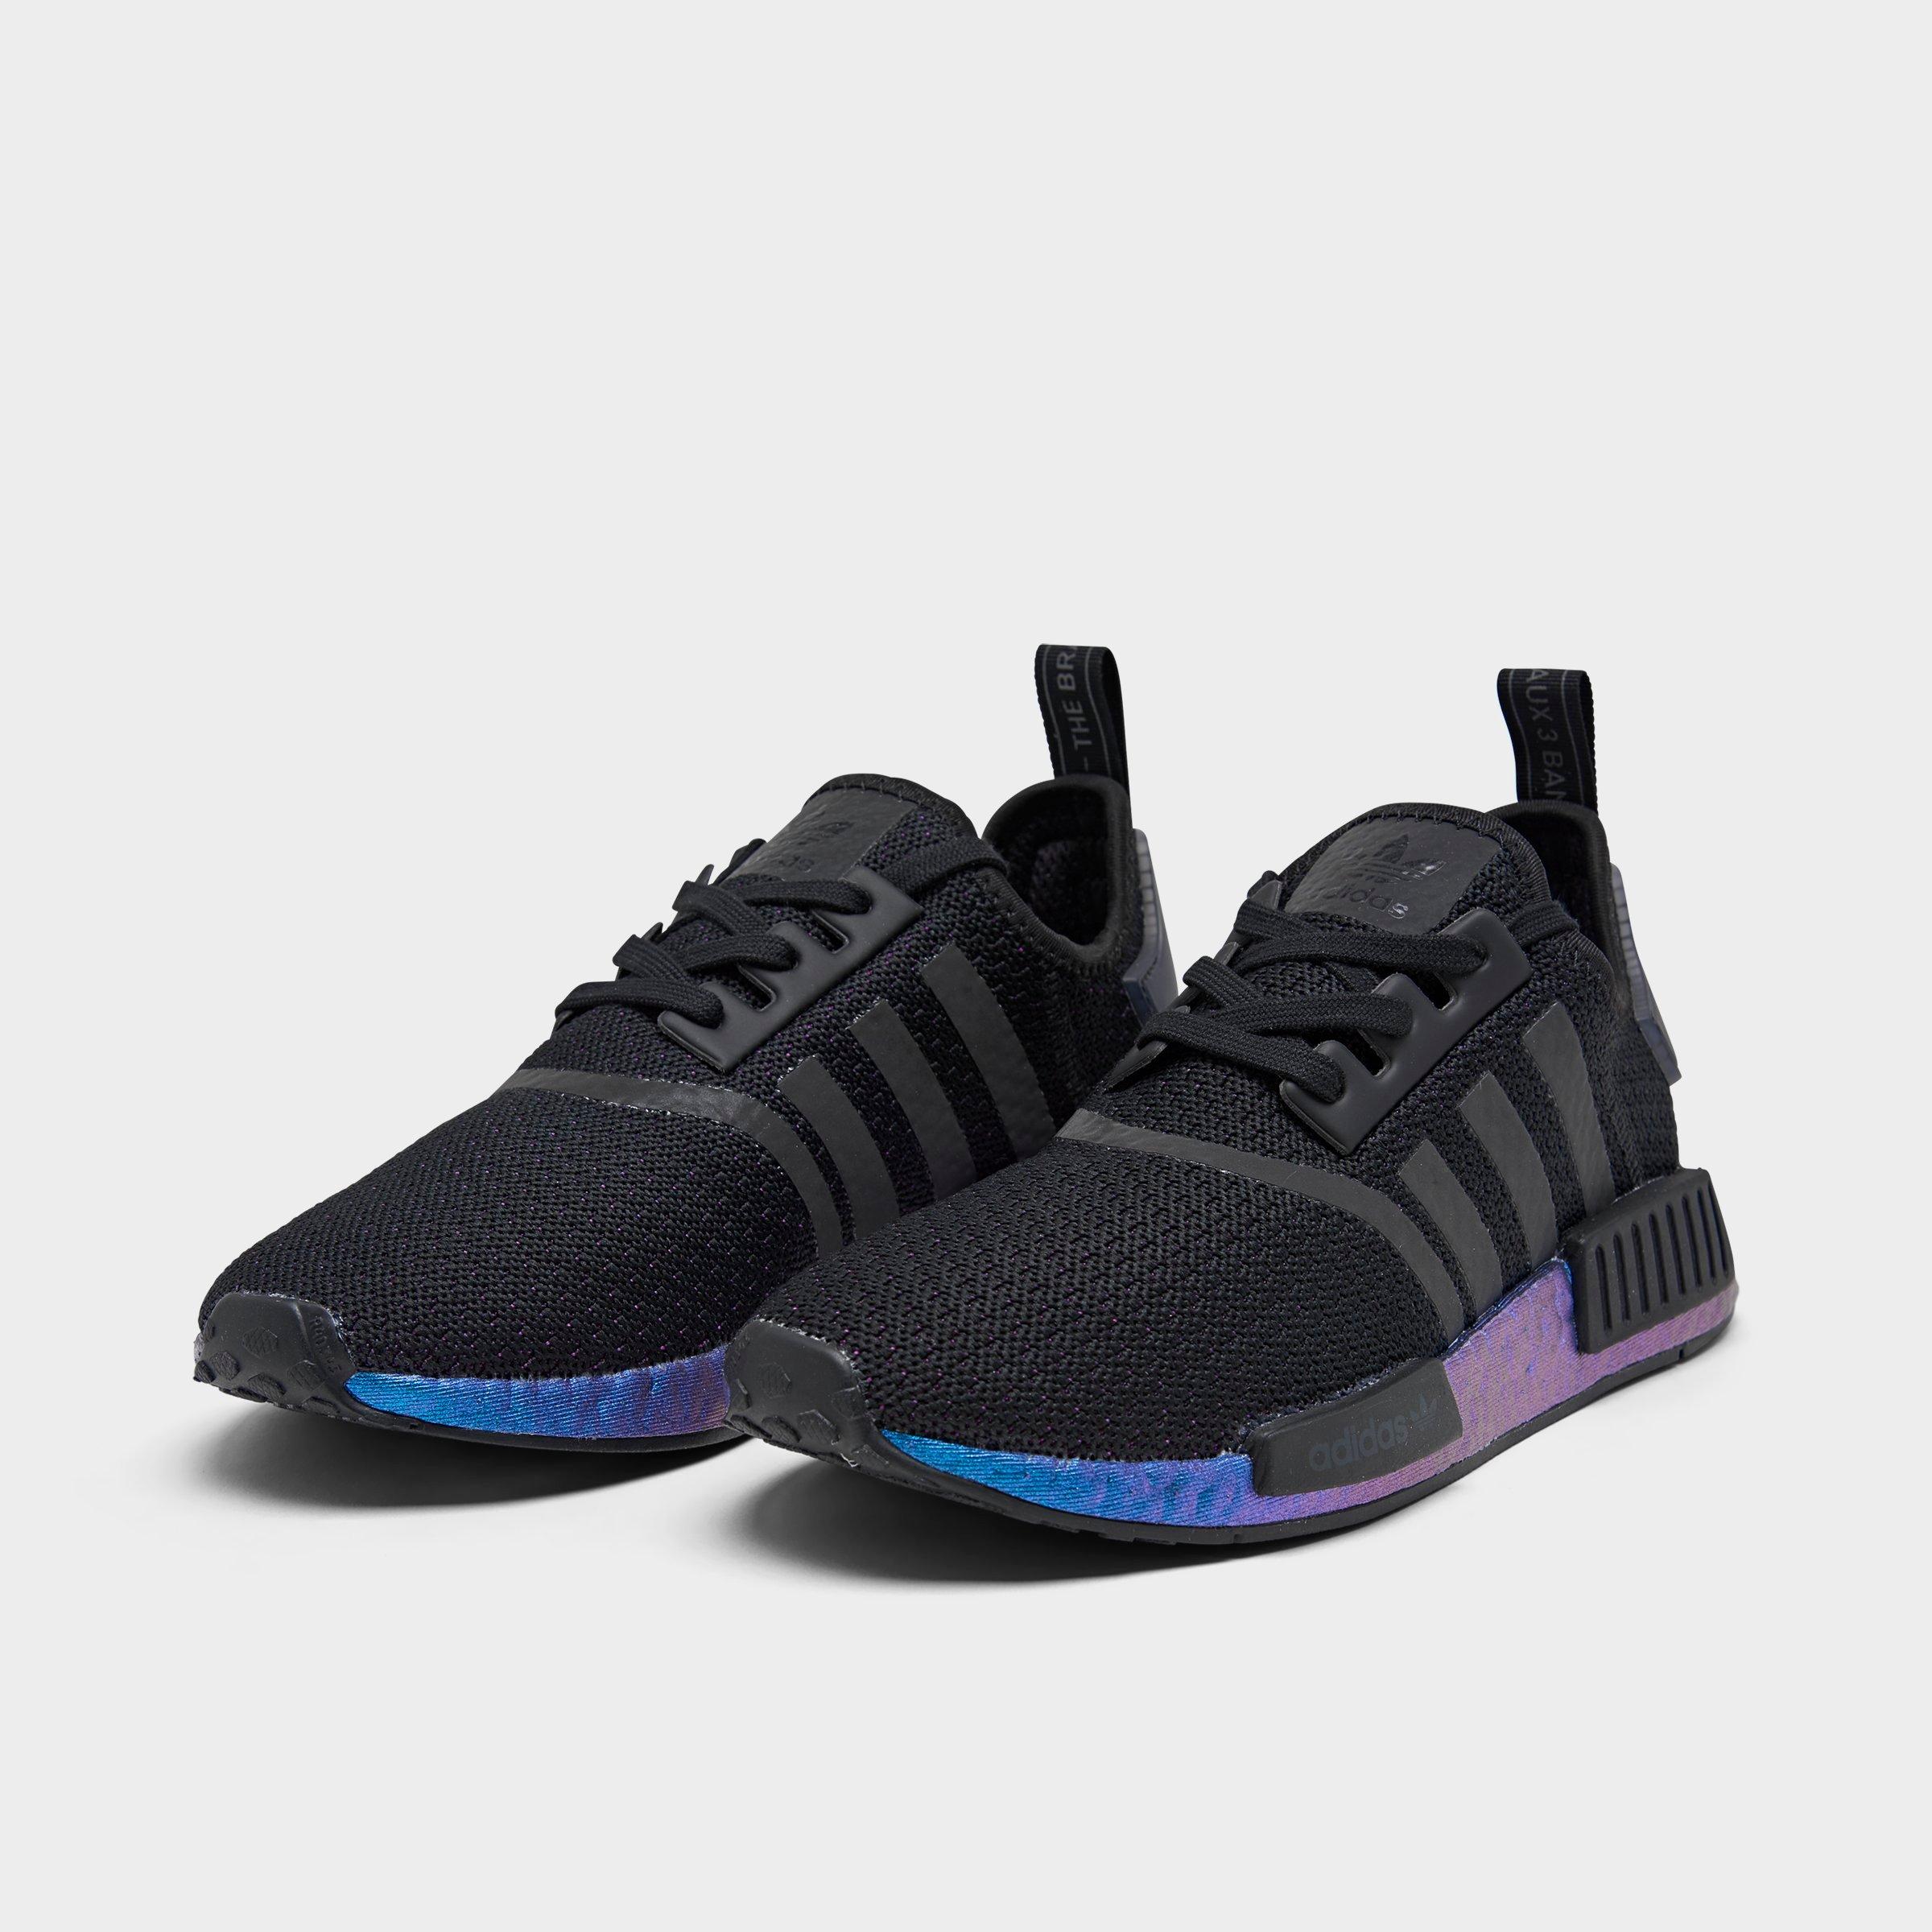 Men's adidas NMD R1 Casual Shoes 